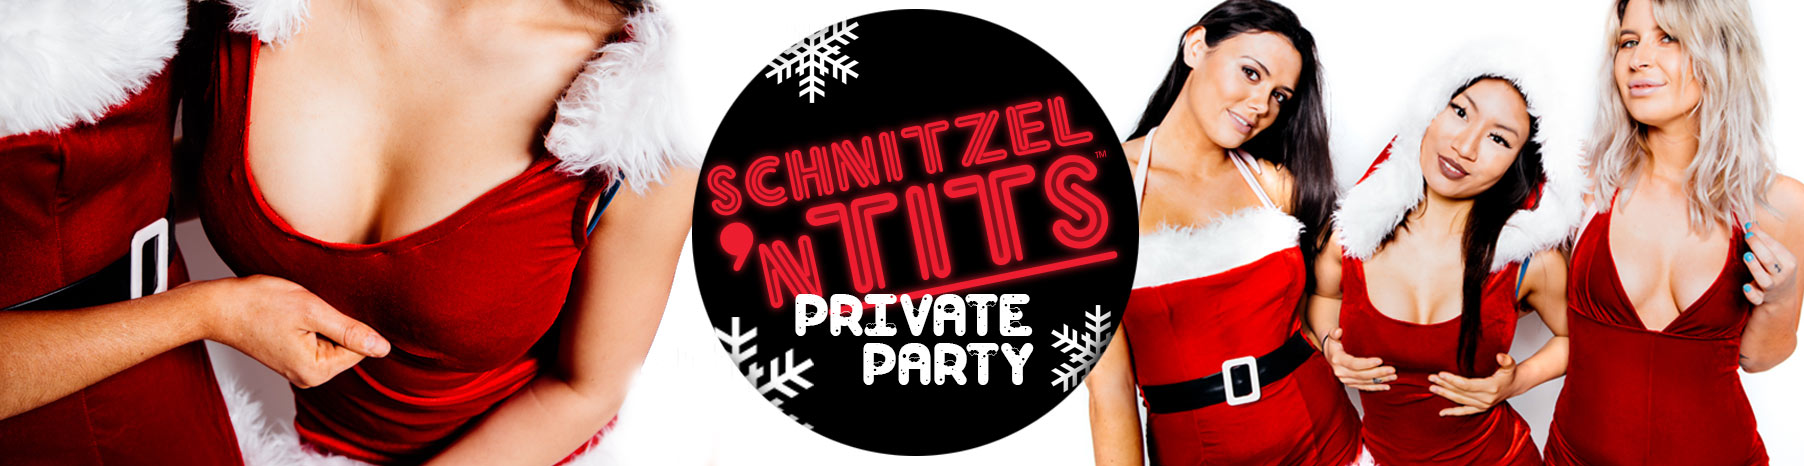 fun staff christmas party ideas private schnitzel n tits